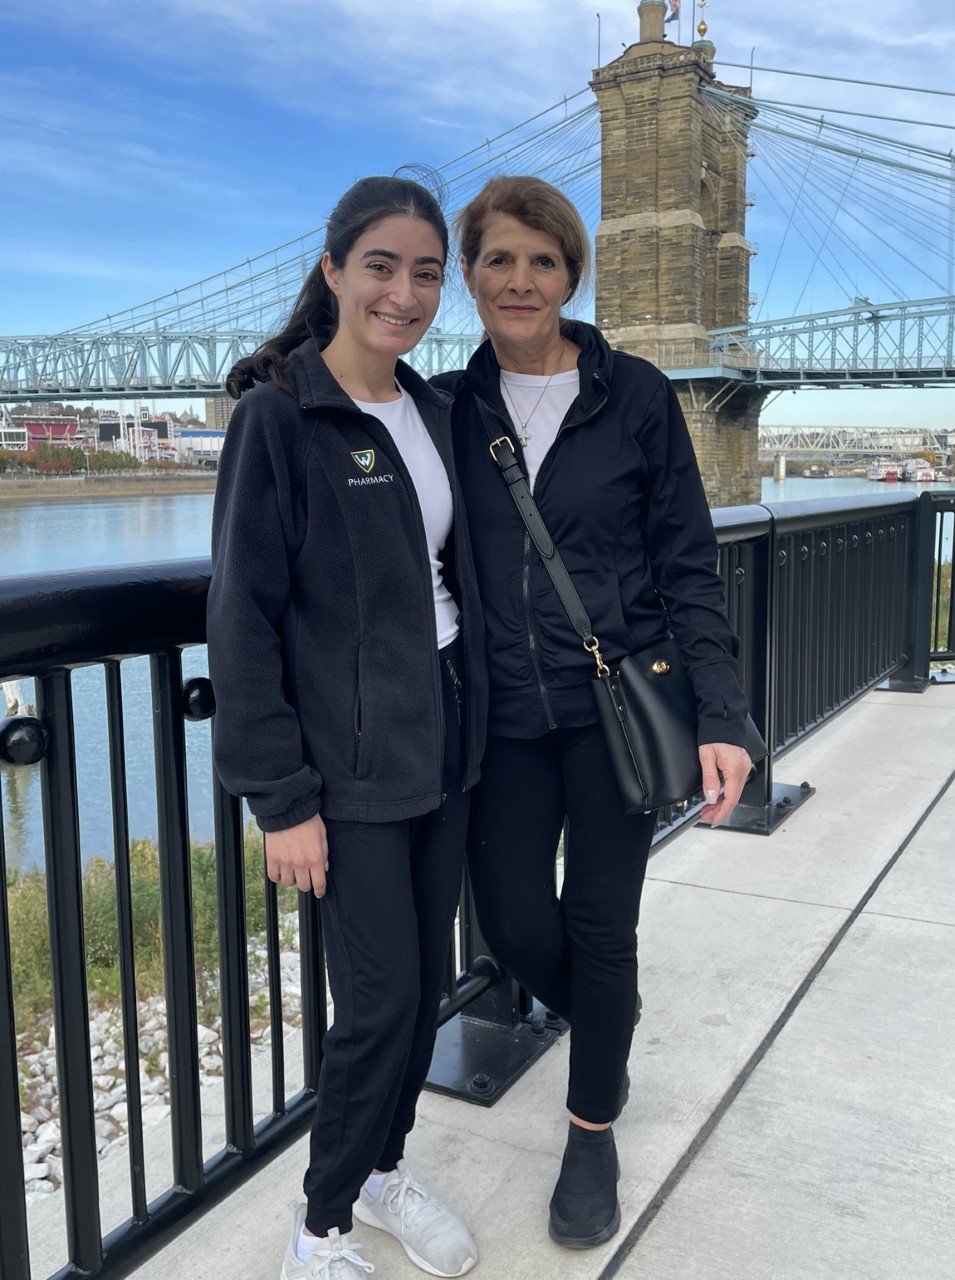 Habba and her mother, Ann, exploring Cincinnati after a day full of MRM programming. A very special guest!